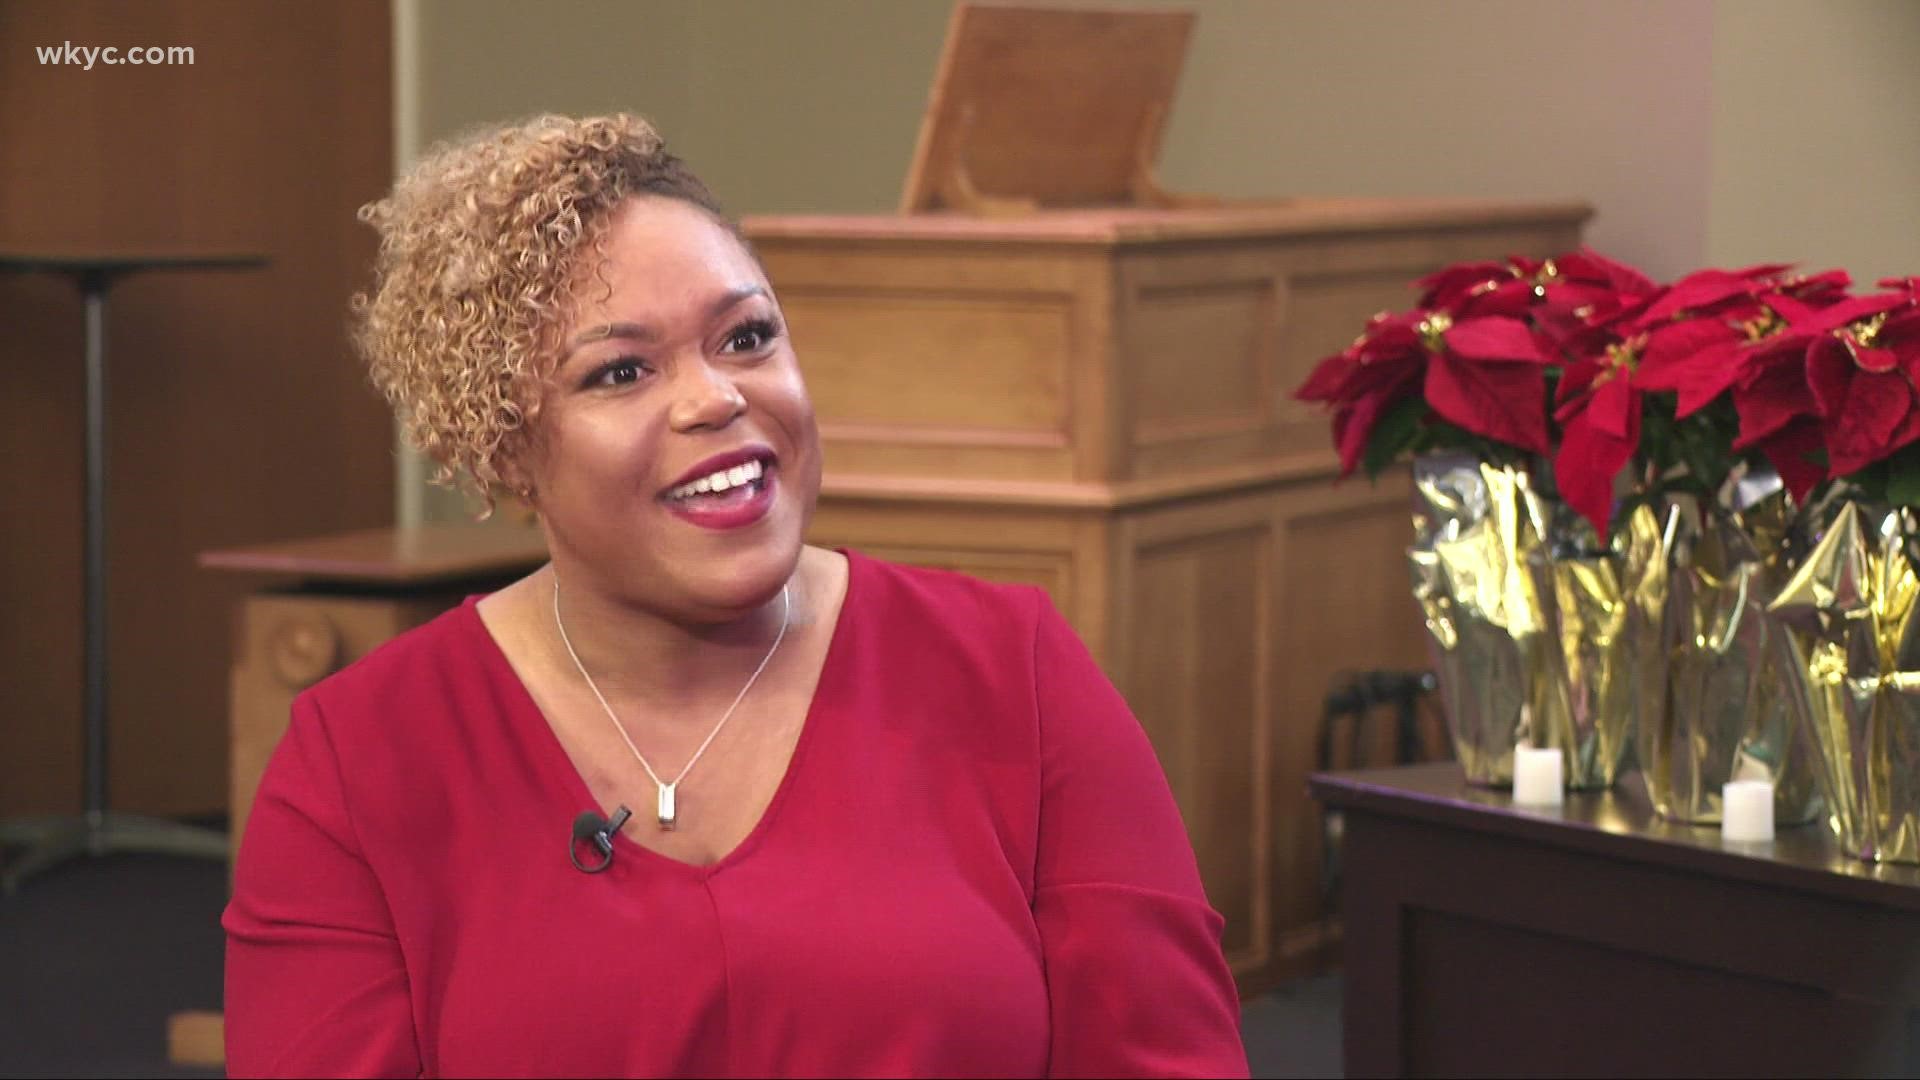 This Christmas season looks a bit different, as we’ve seen for years. The Reverend Courtney Clayton Jenkins isn’t slowing down.